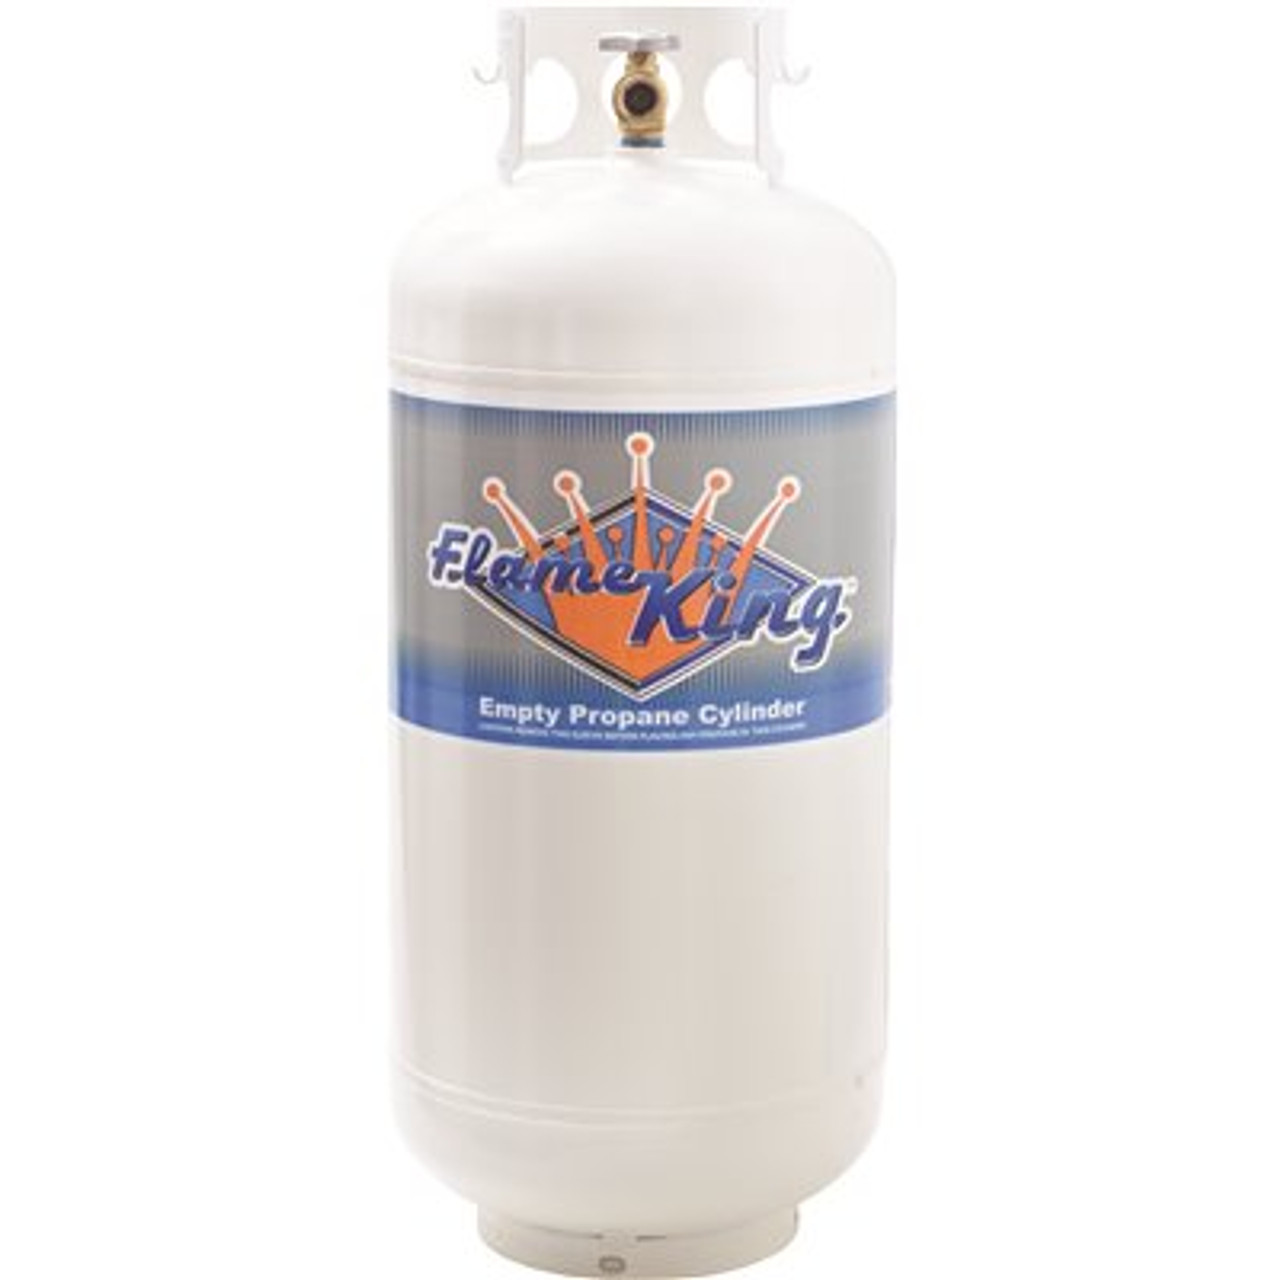 Flame King 40 lbs. Empty Propane Cylinder with Overfill Protection Device Valve